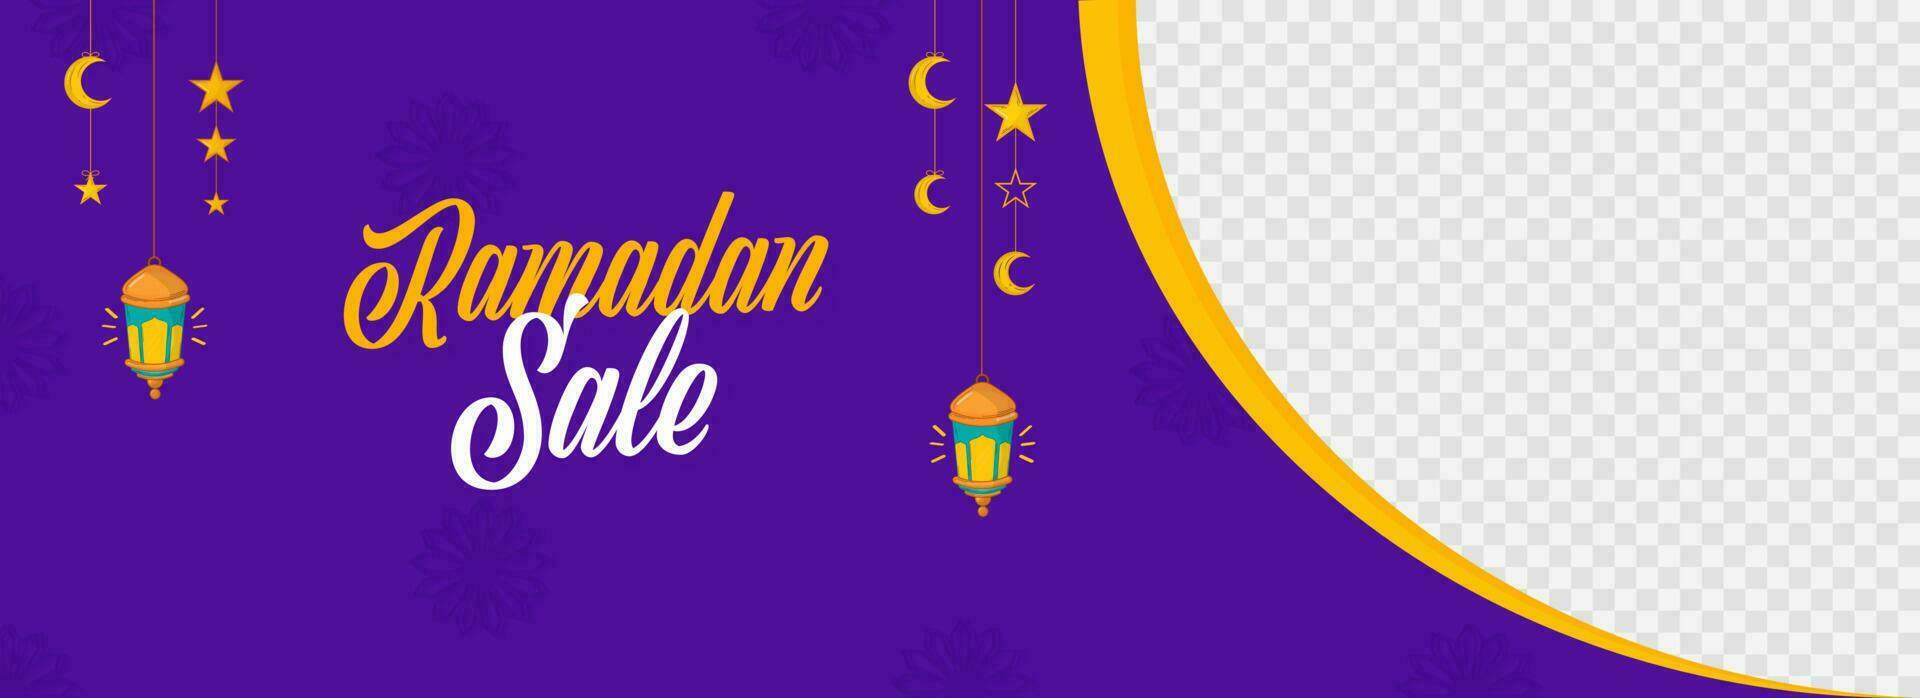 Ramadan Sale Banner Or Header Design With Space For Product Image On Purple And Png Background. vector